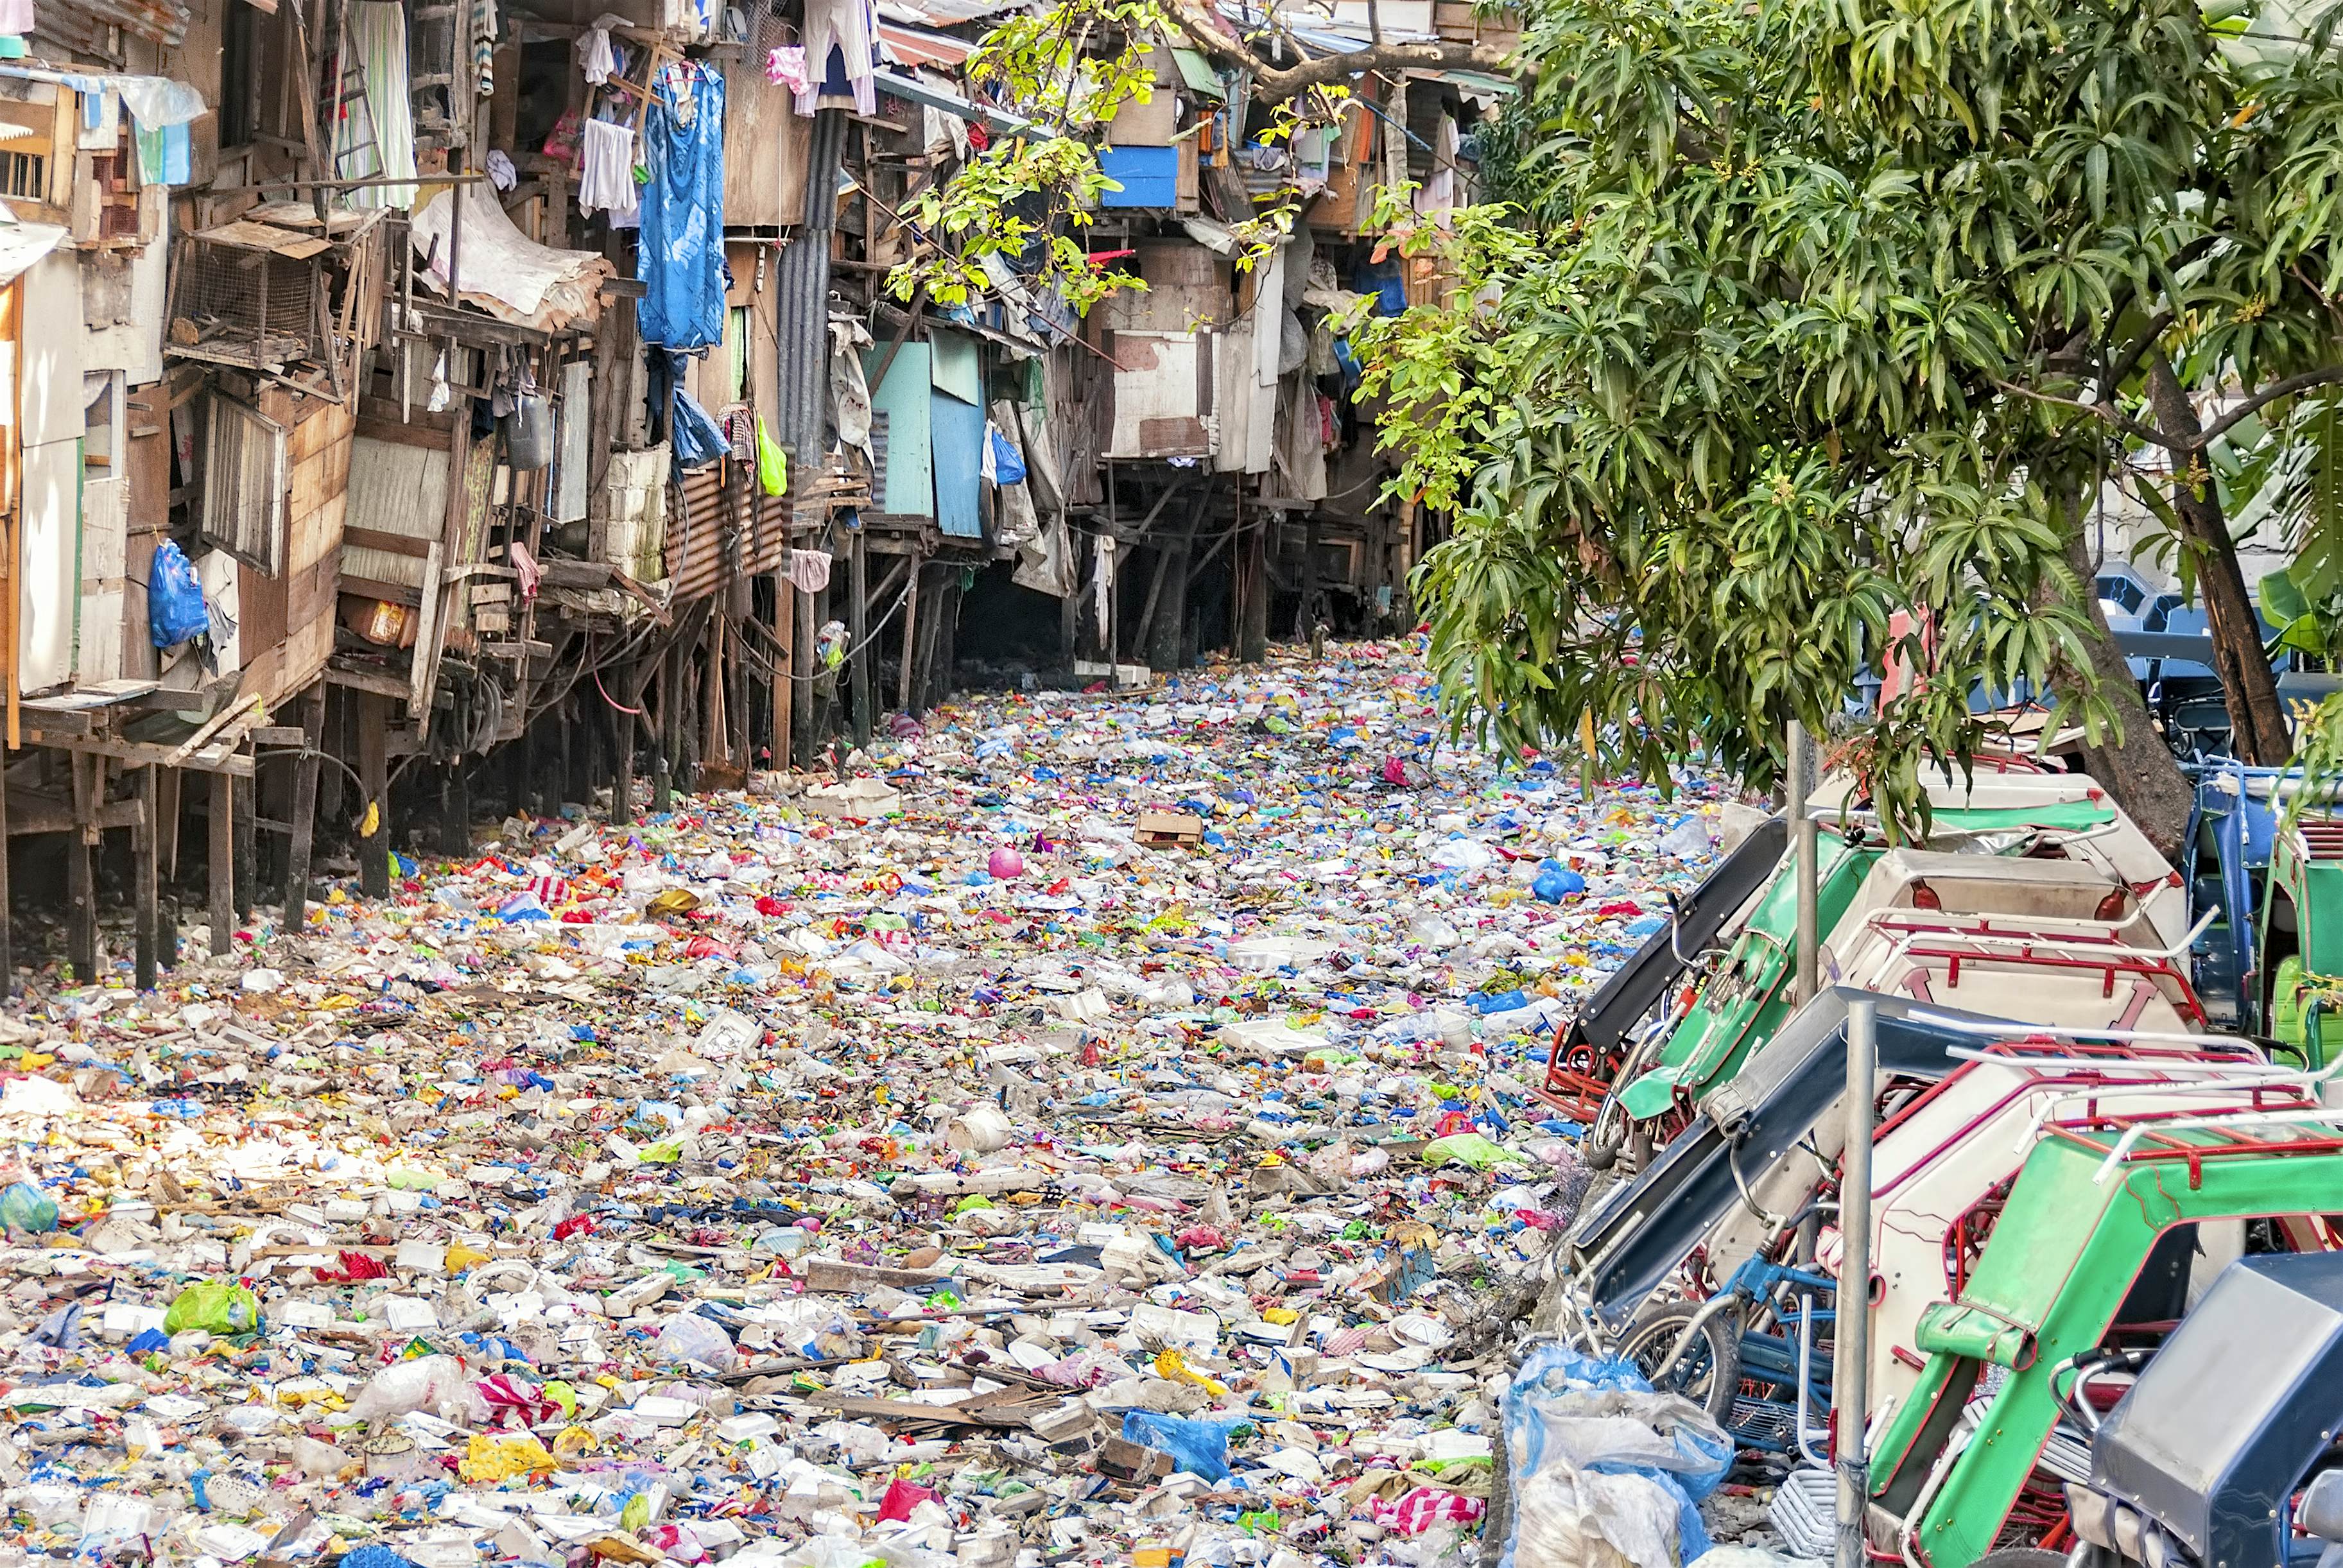 Philippines tackles its waste problem by building roads from recycled